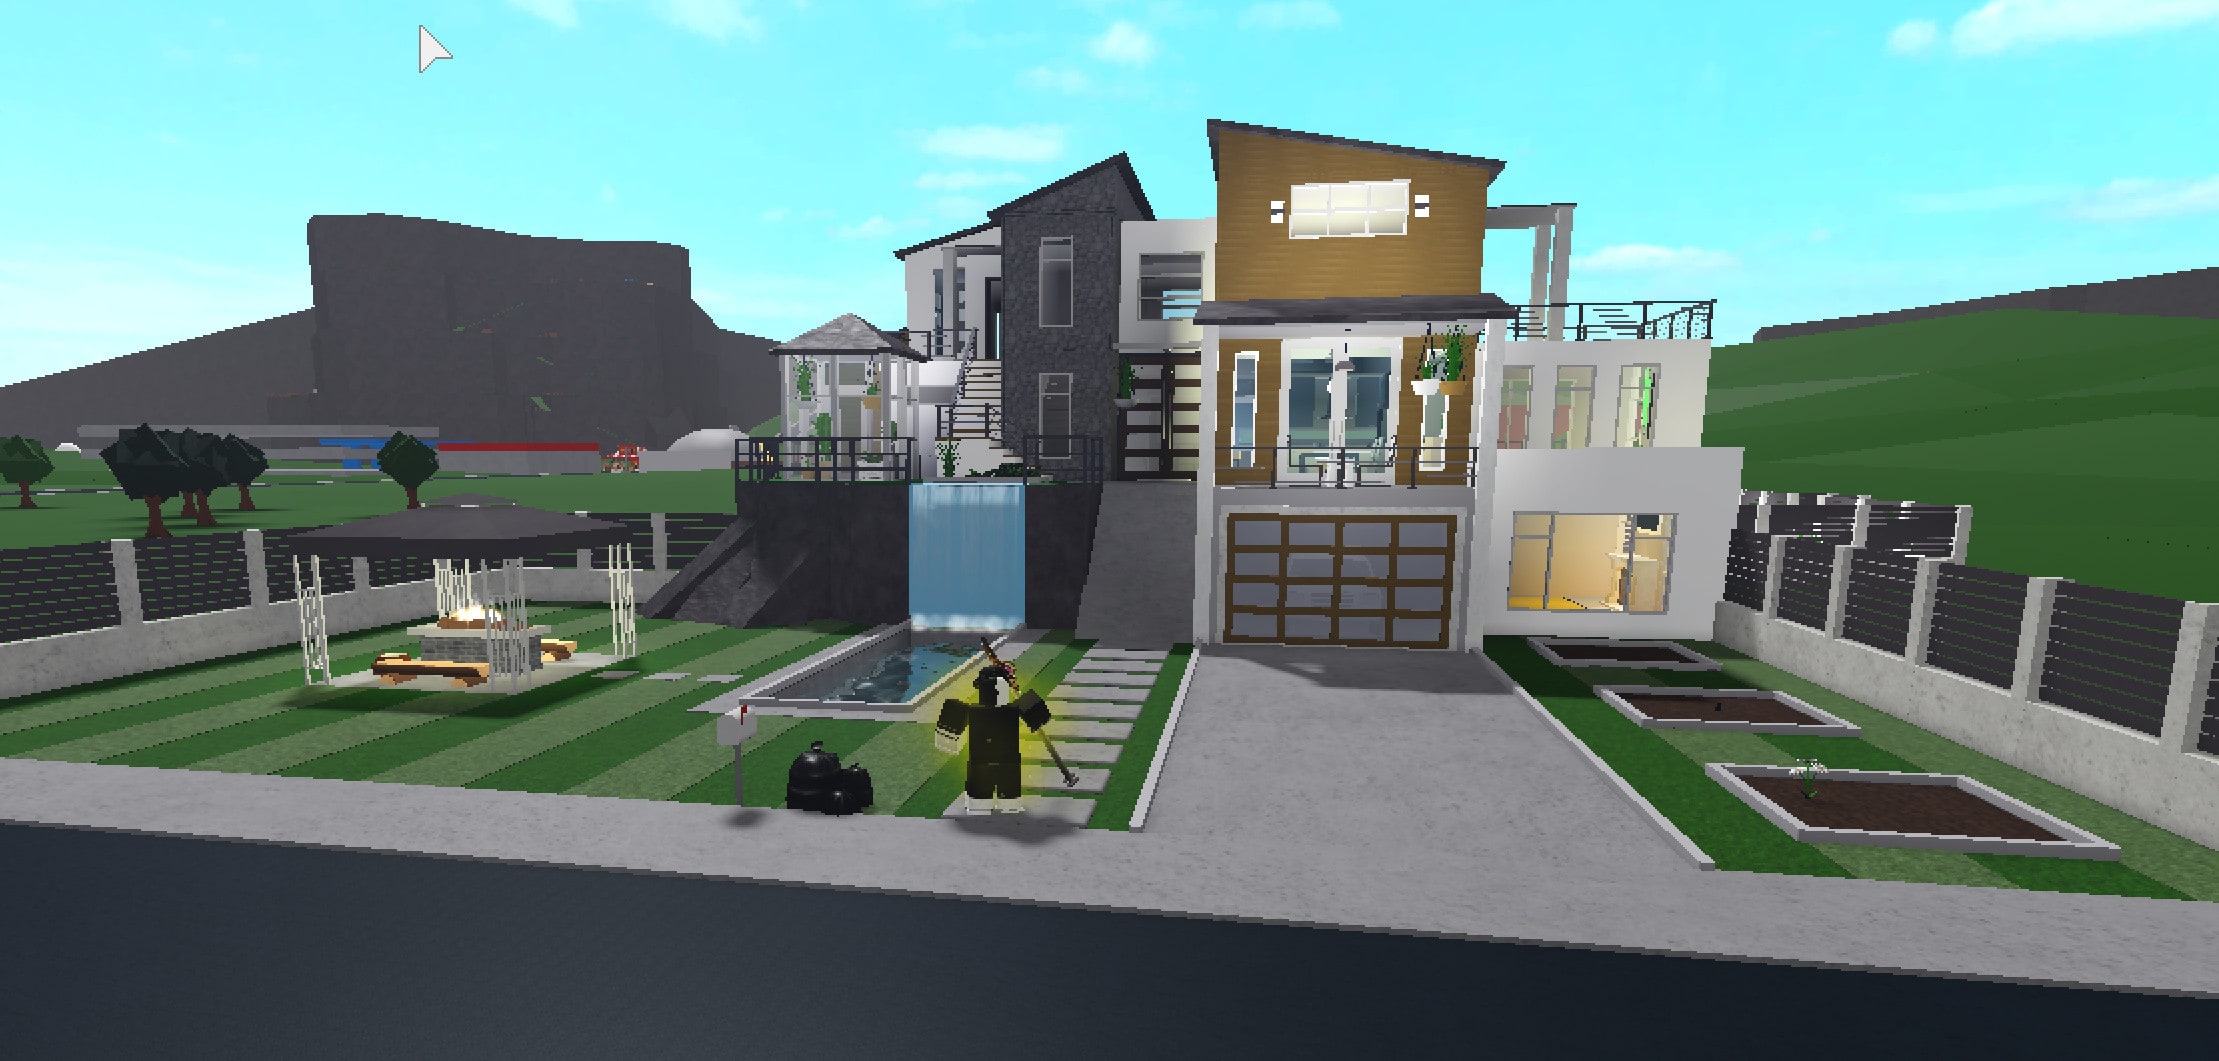 Build You A House On Roblox Welcome To Bloxburg By Nexorite Fiverr - welcome roblox bloxburg